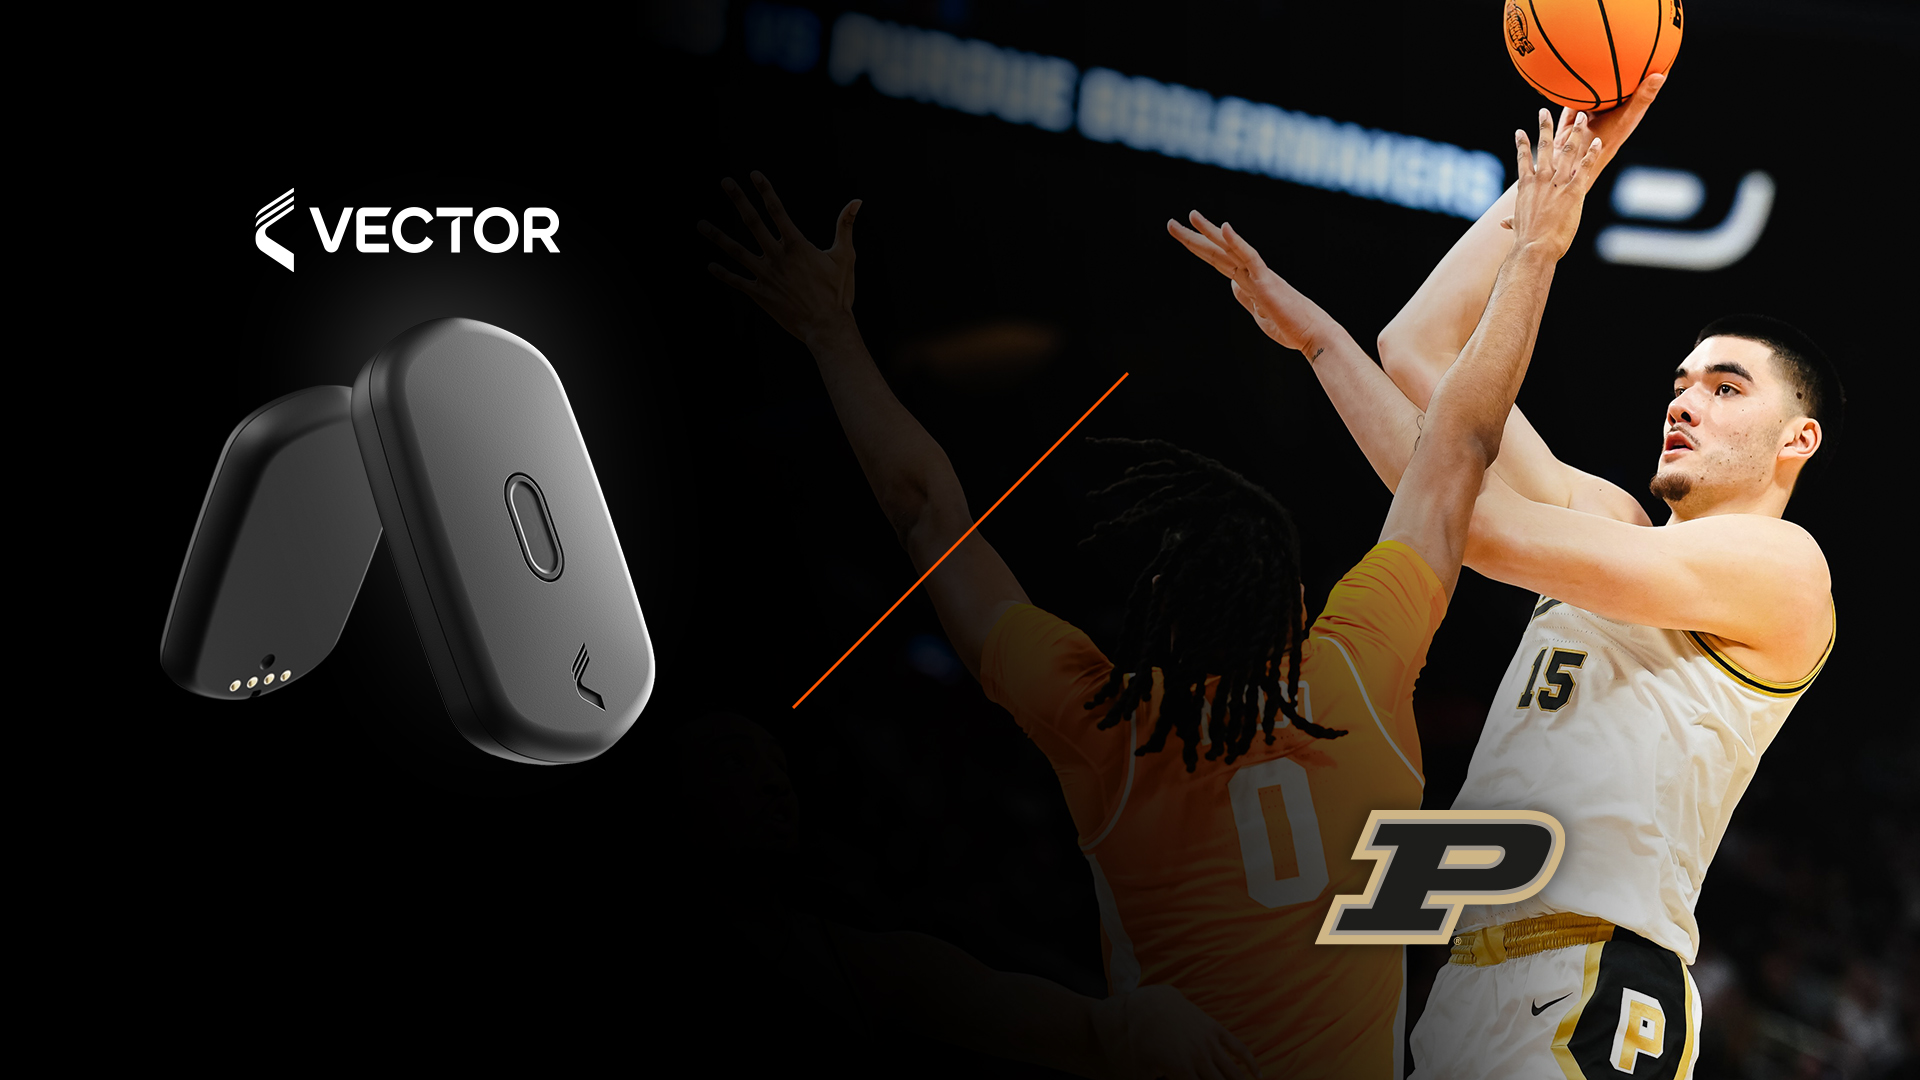 Promotional graphic of a Vector T7 sports monitoring device with a Purdue basketball player in action, poised to shoot the ball.